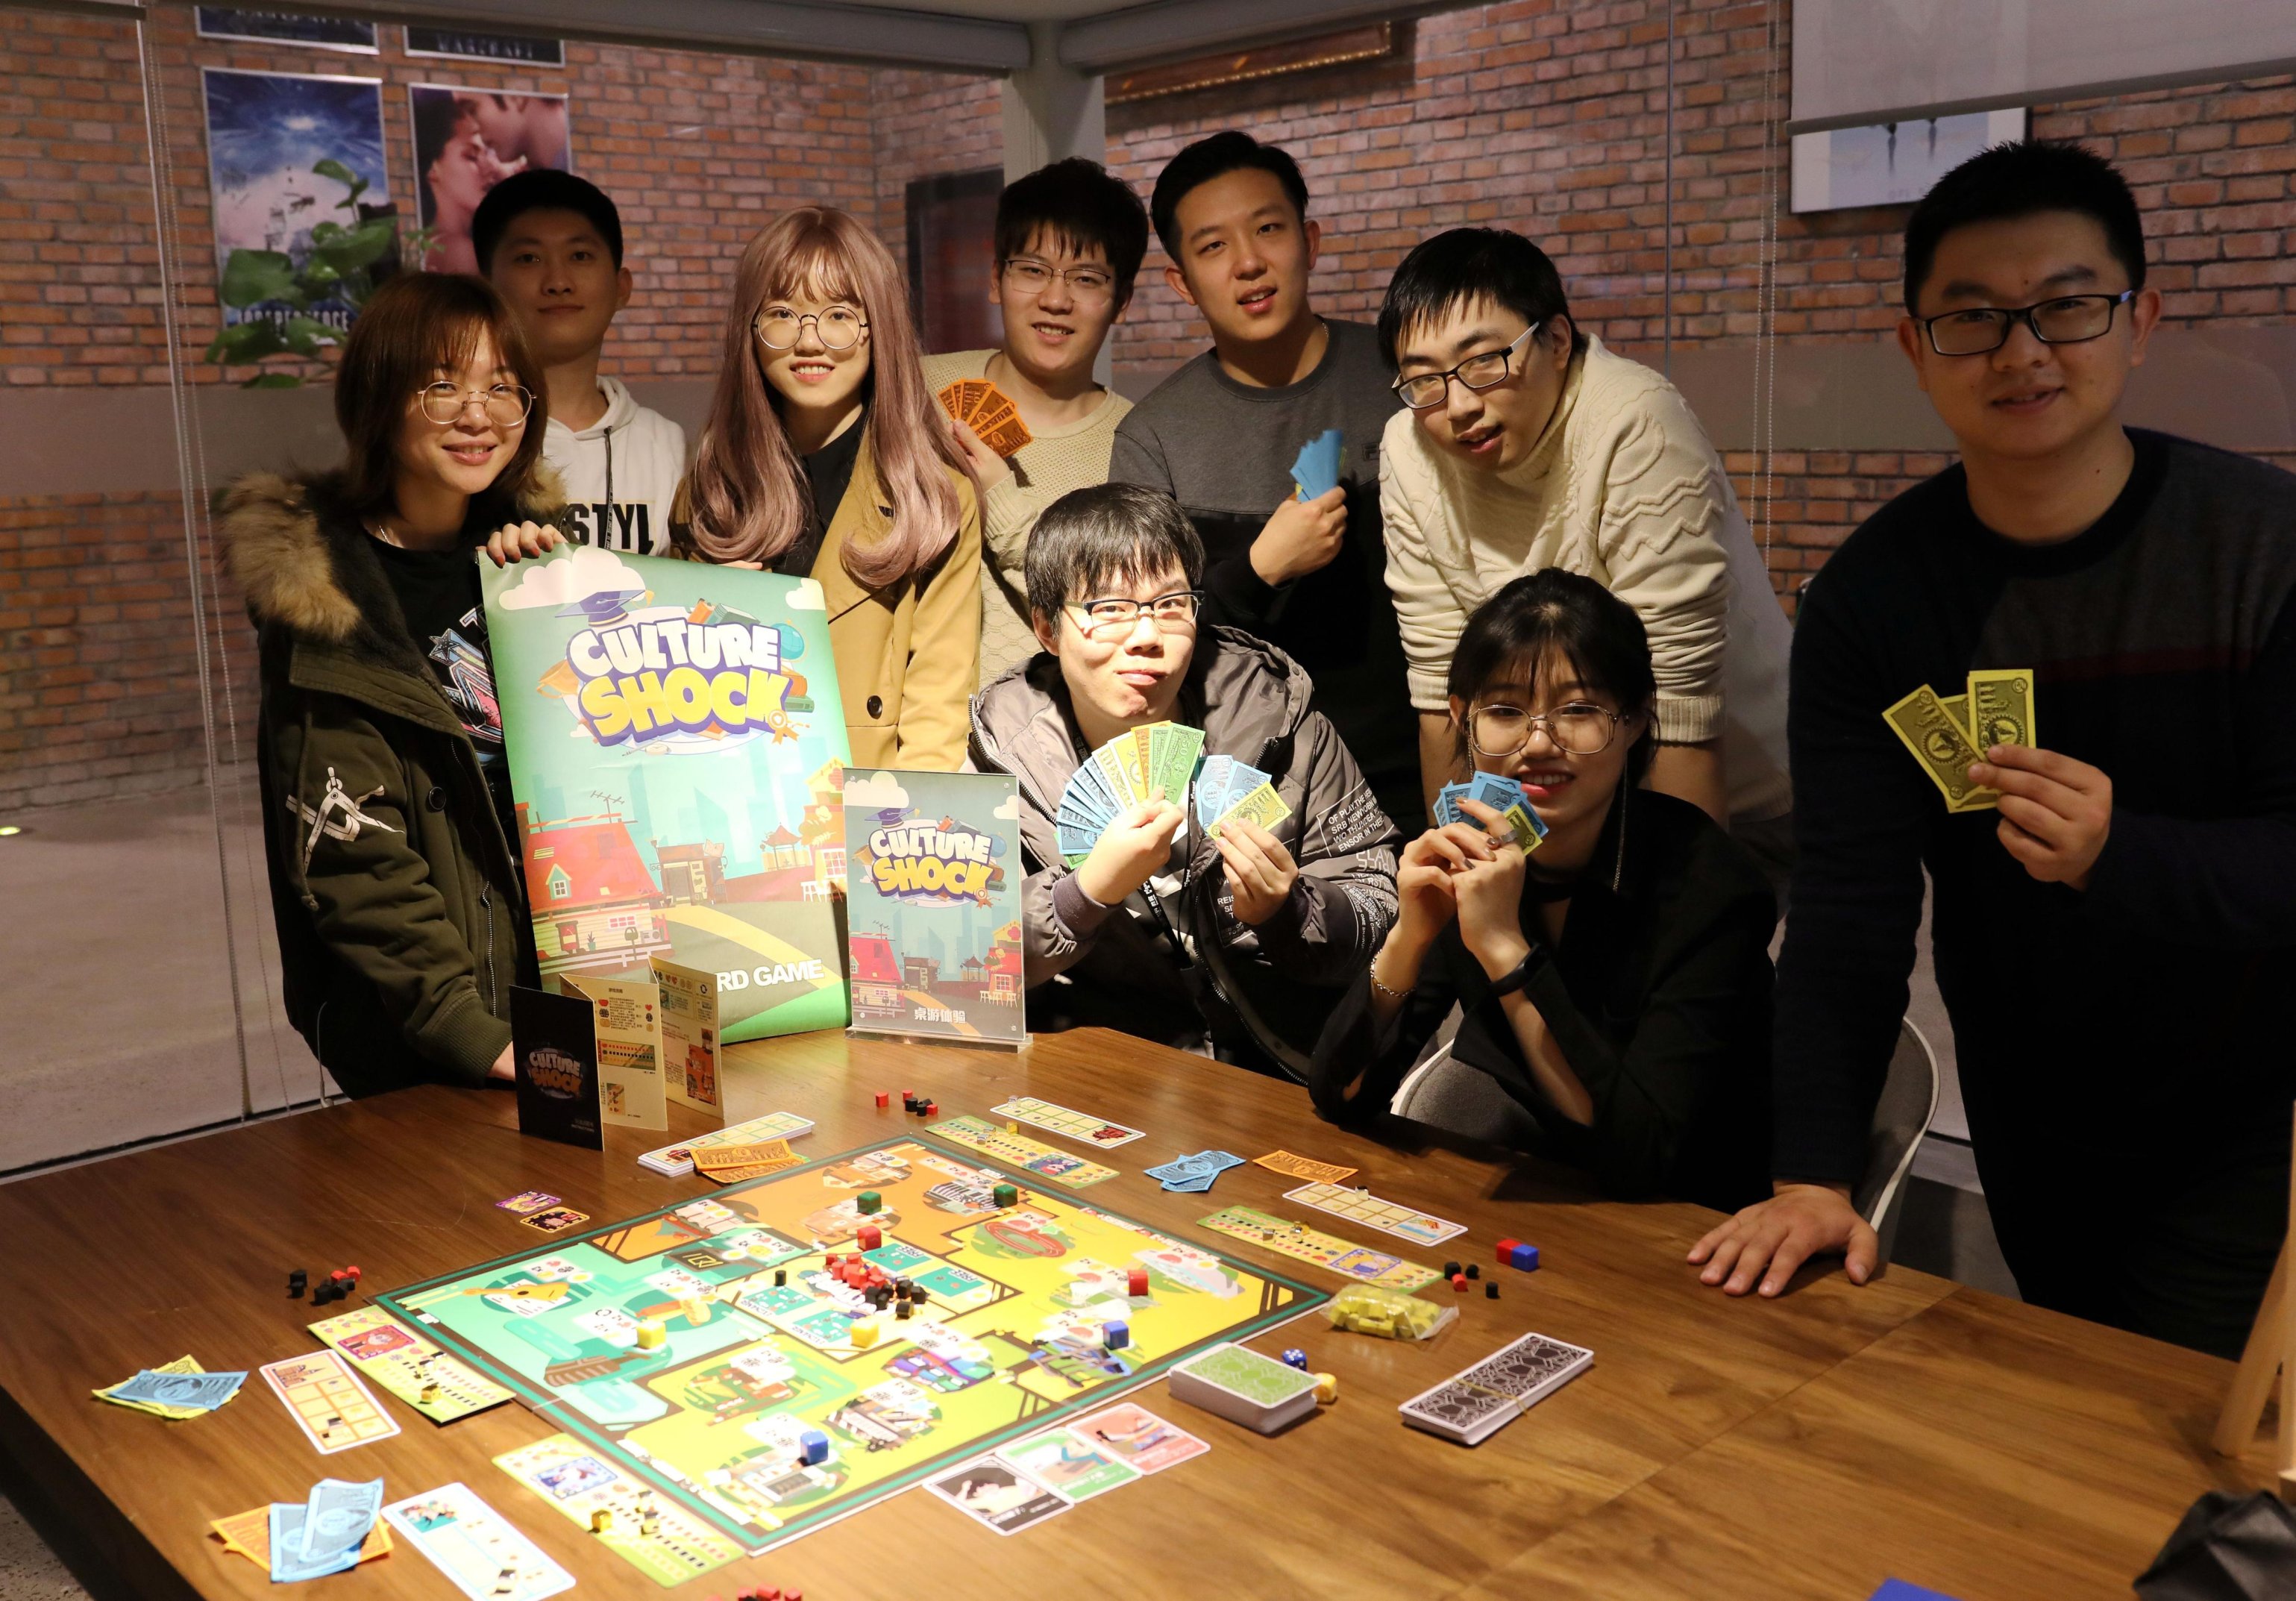 Board games by Abertay students win top awards in China